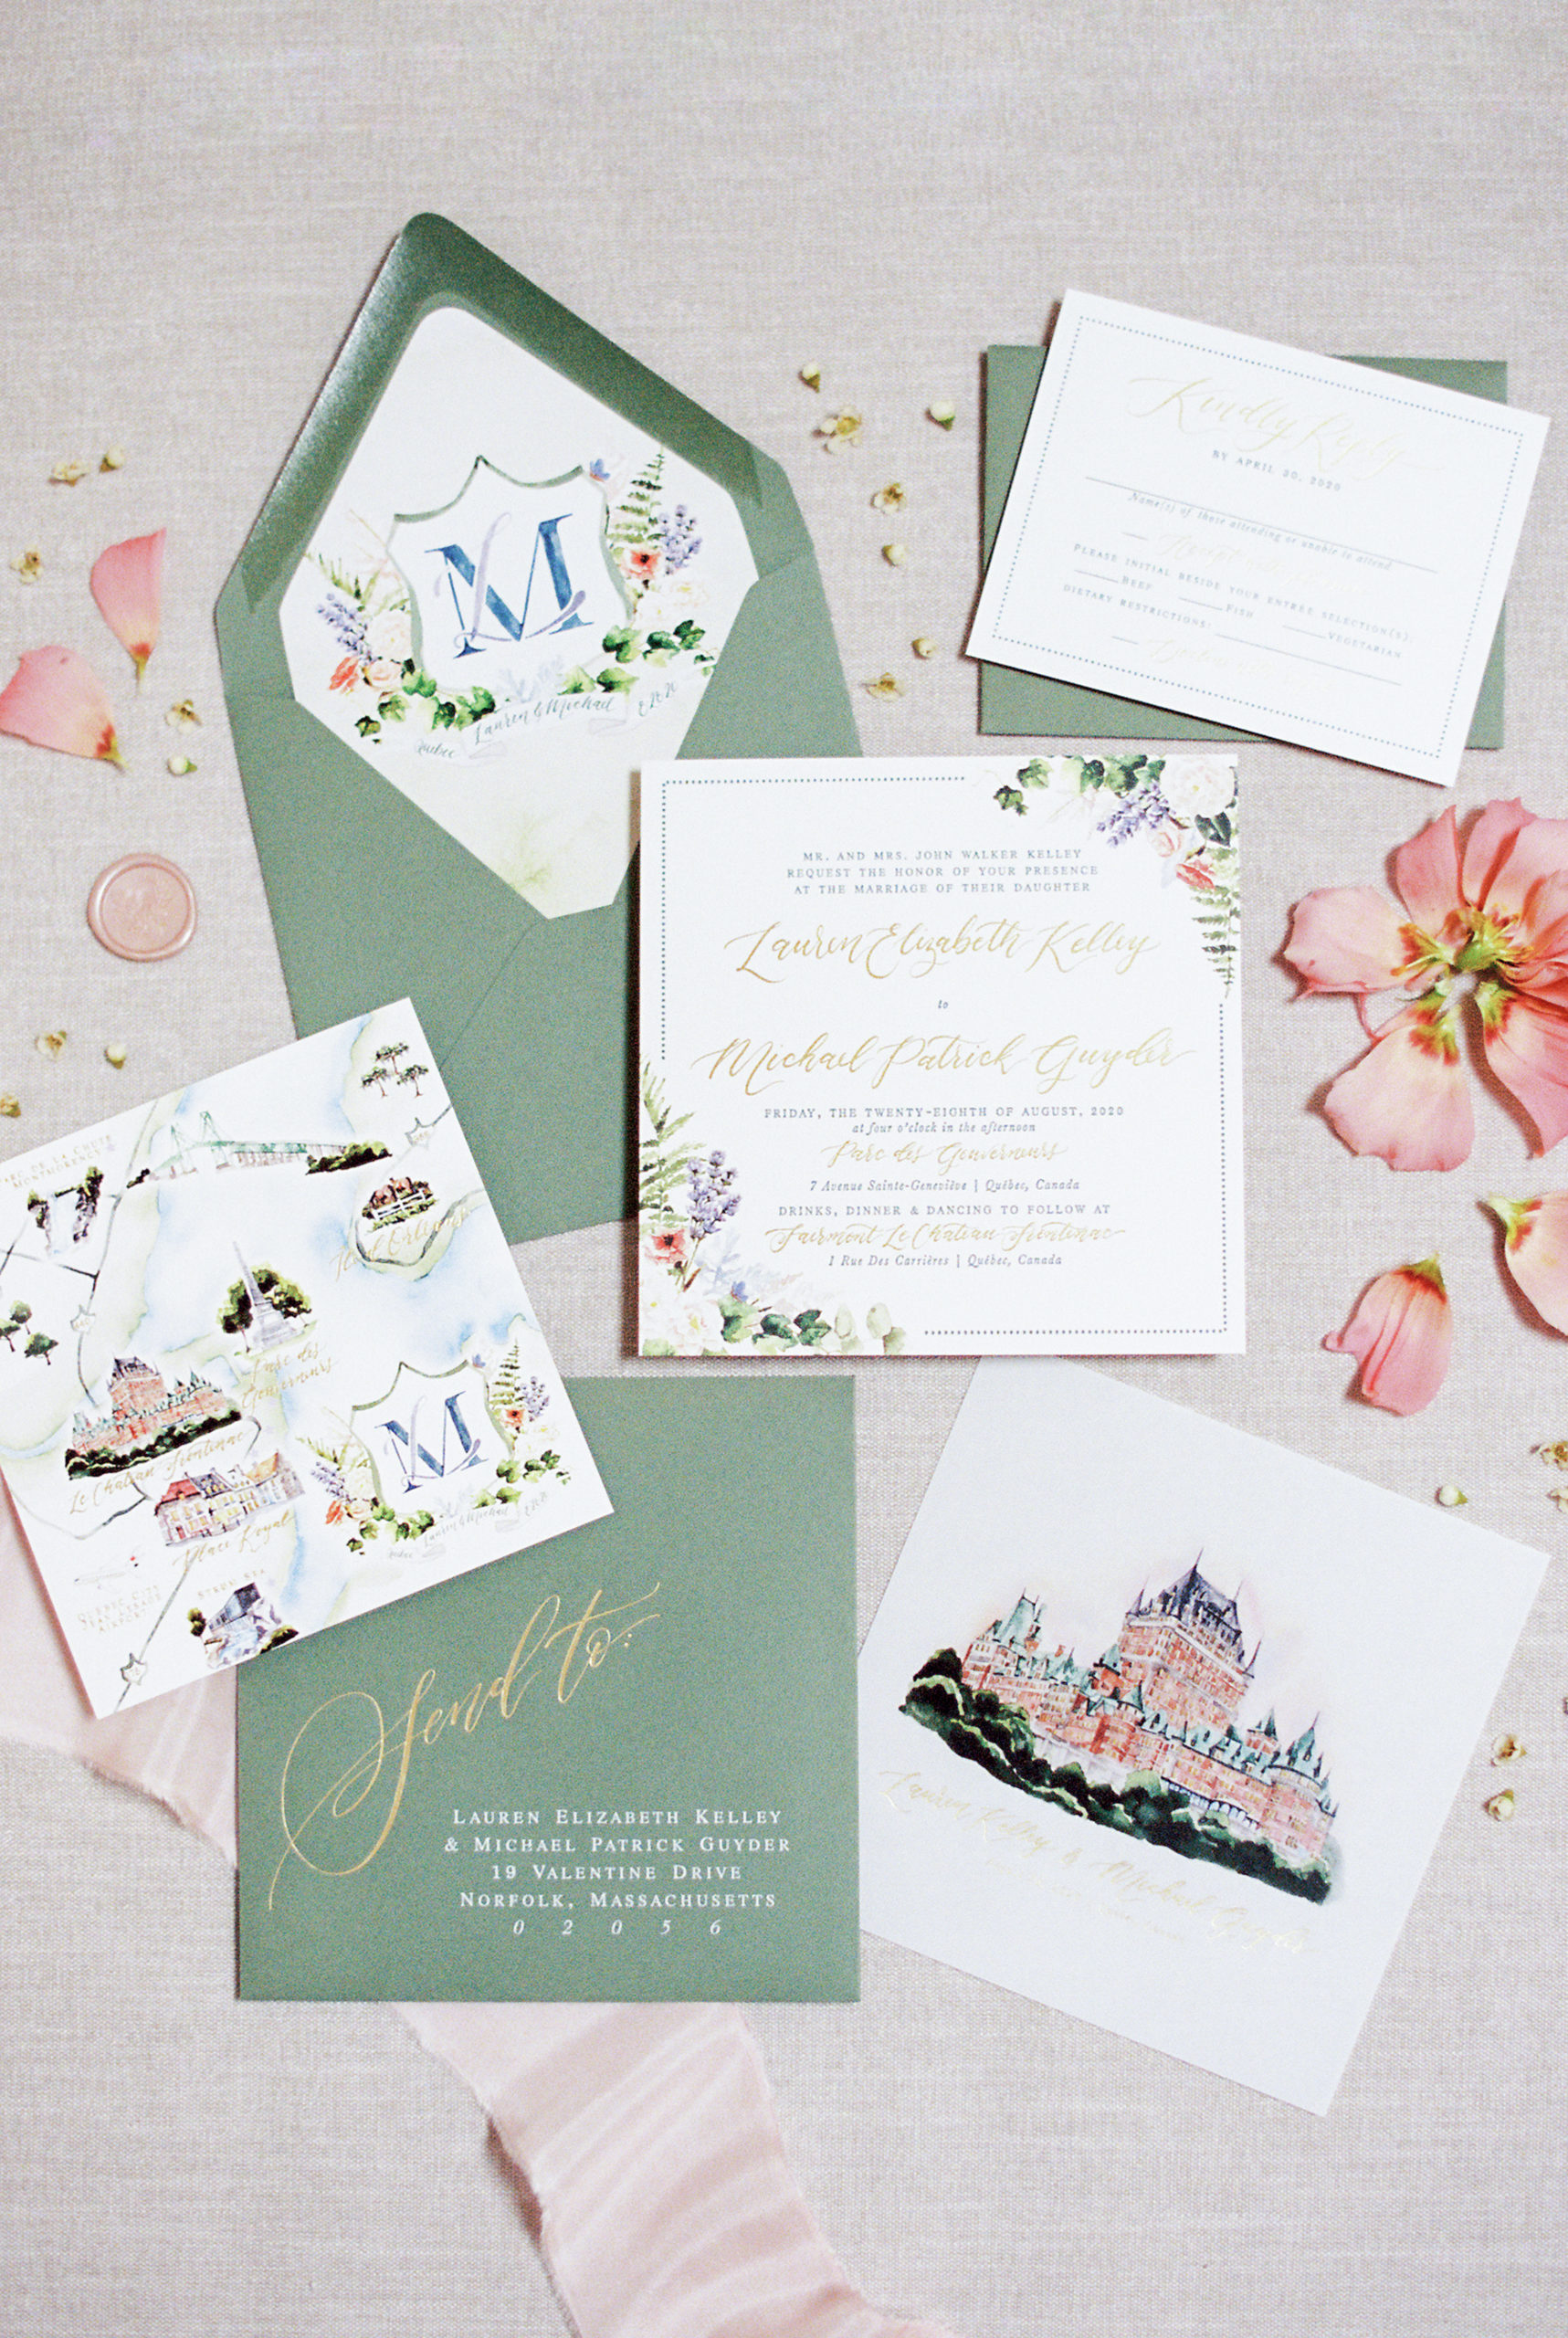 custom wedding invitations with gold foil letterpress and watercolor of church